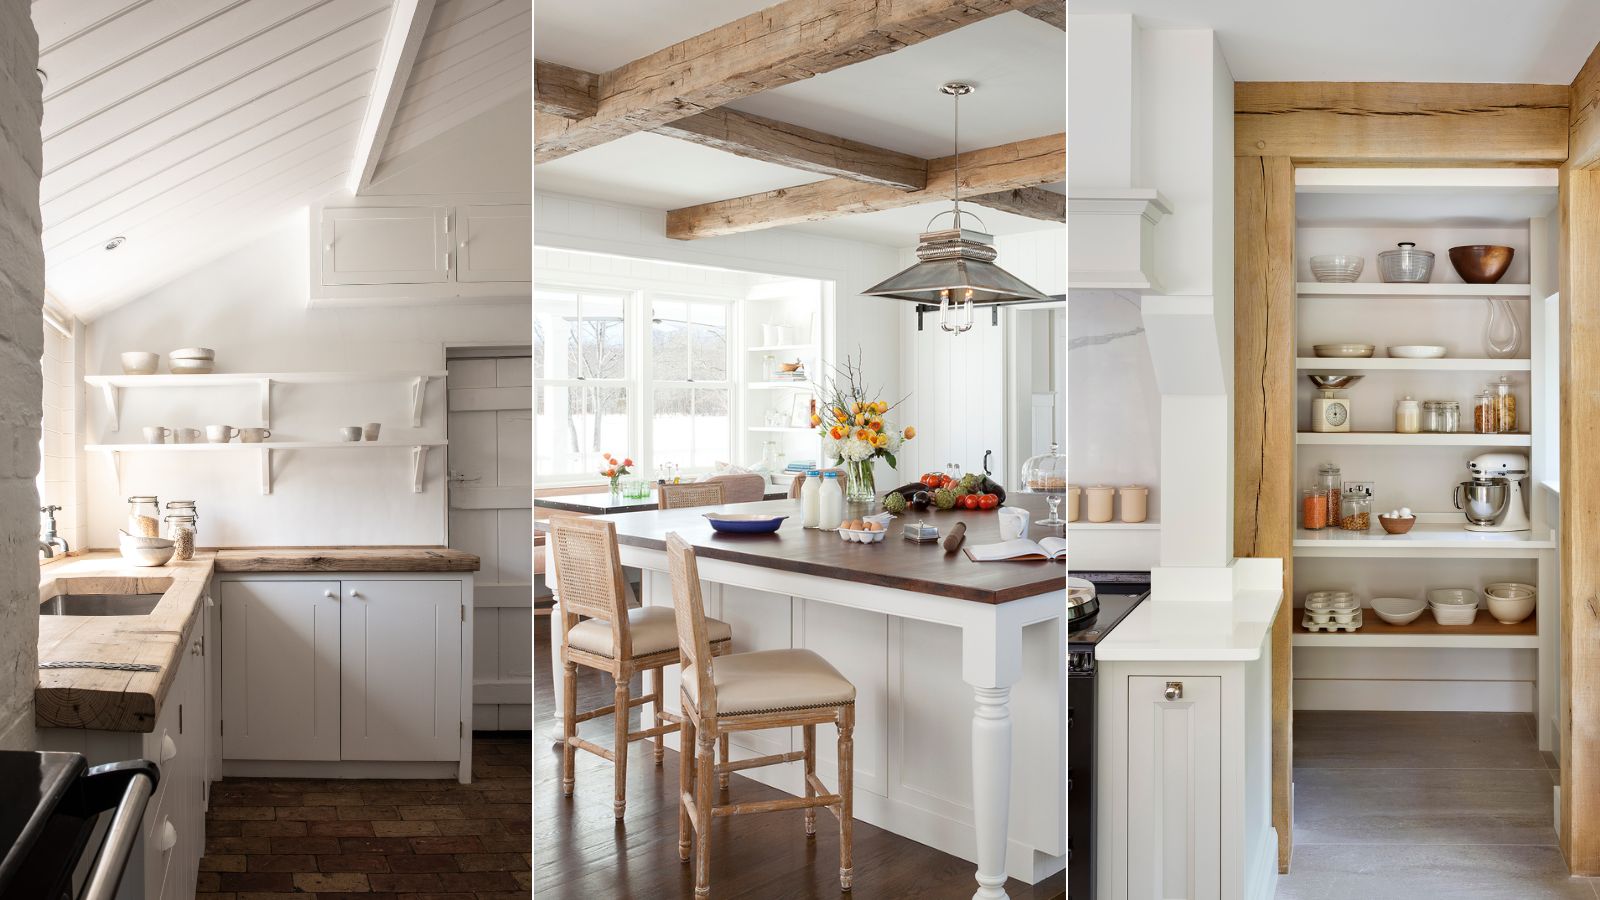 How to create a country kitchen – the key features from cabinets to taps to handles